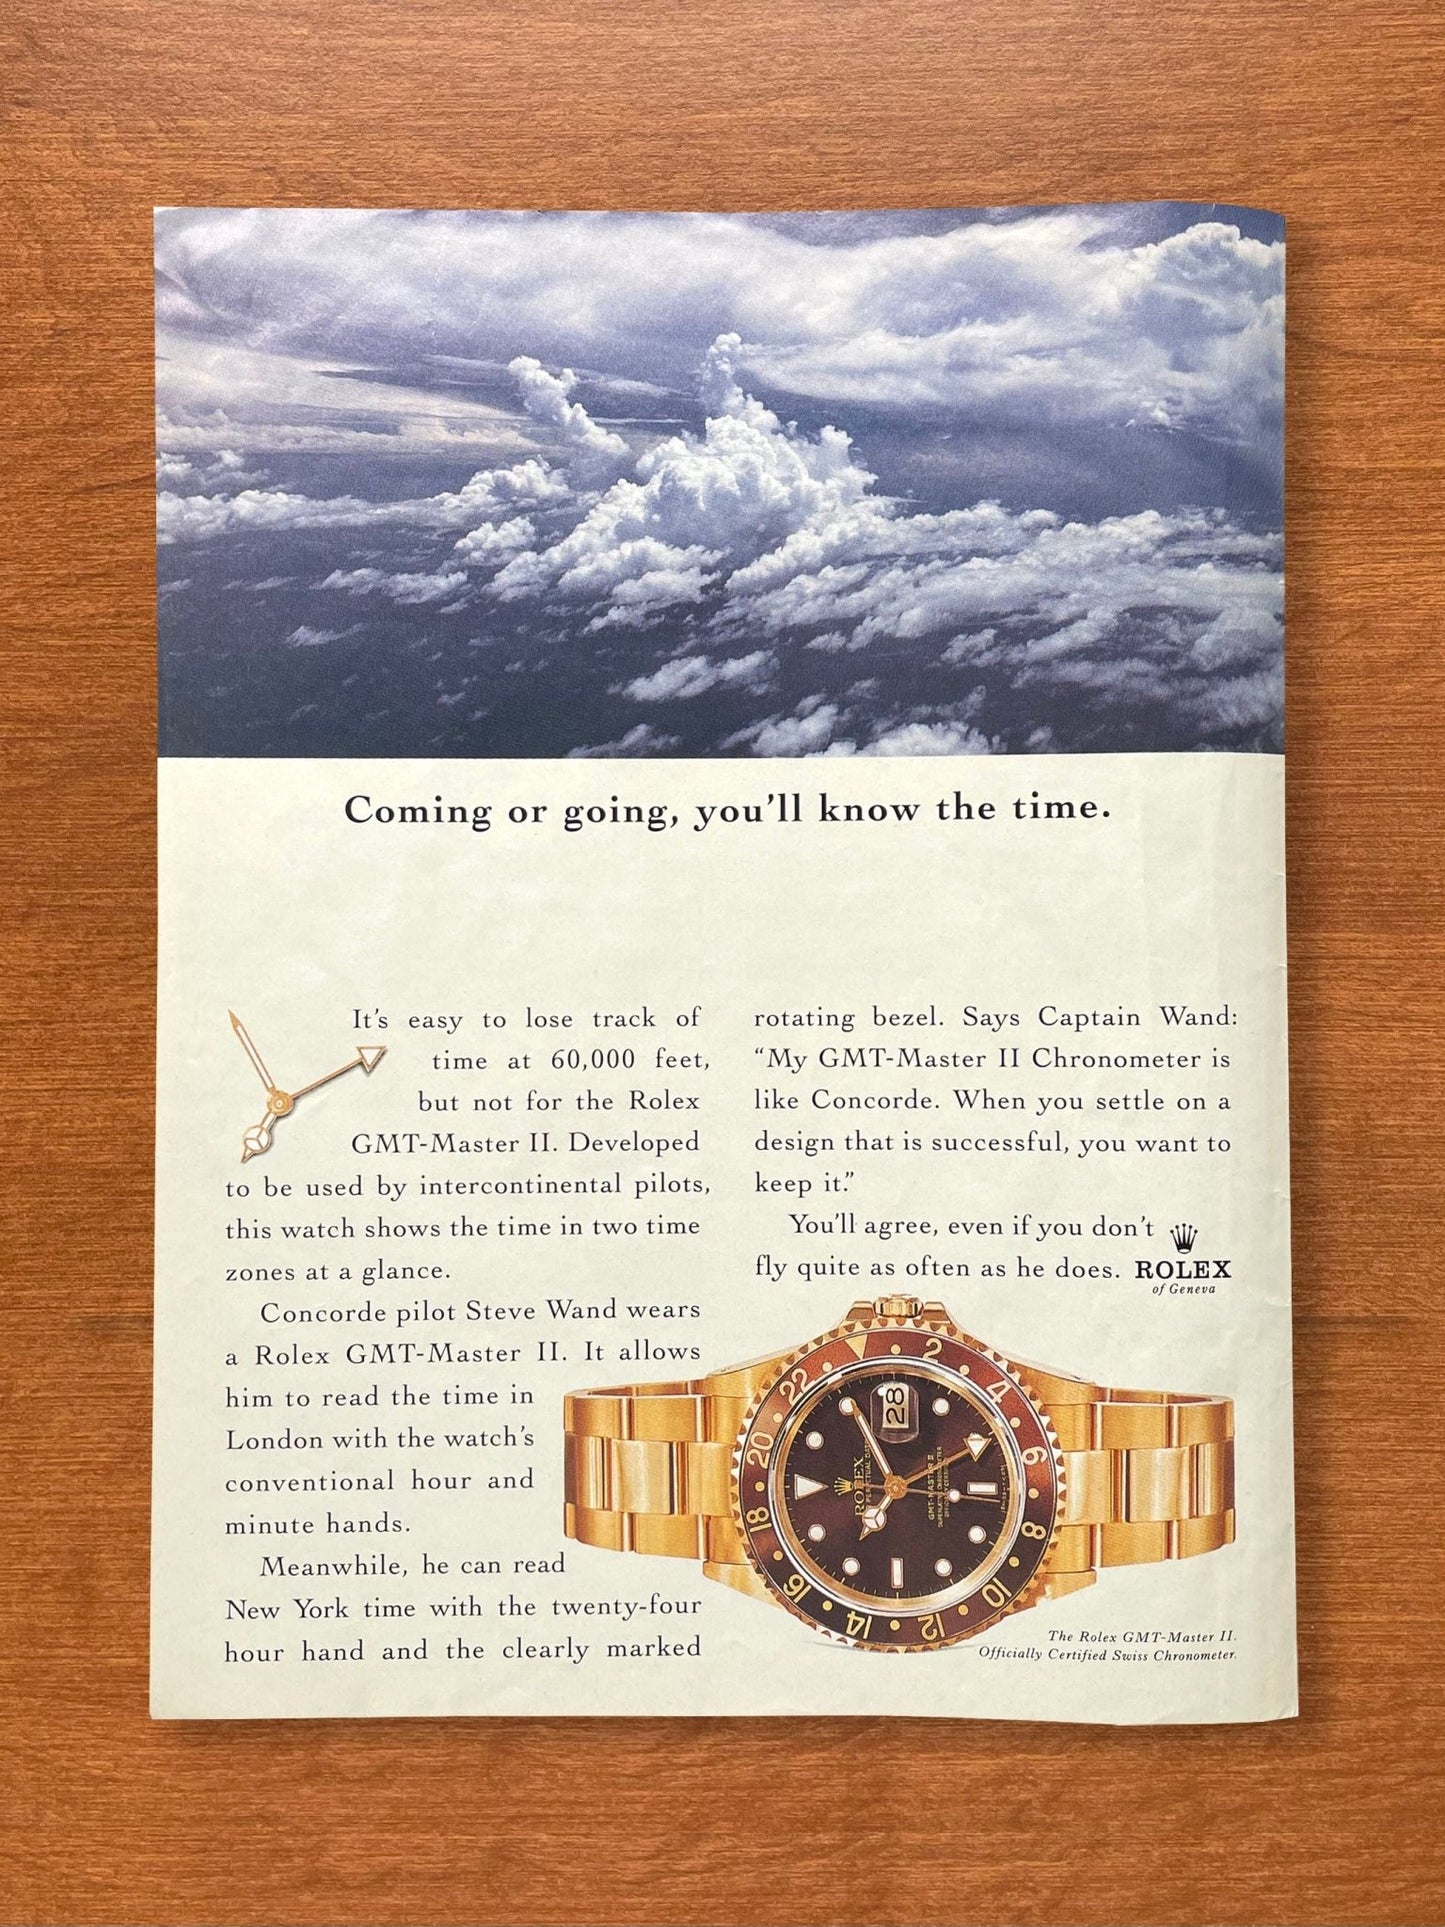 1997 GMT Master II Ref. 16718 "you'll know the time." Advertisement